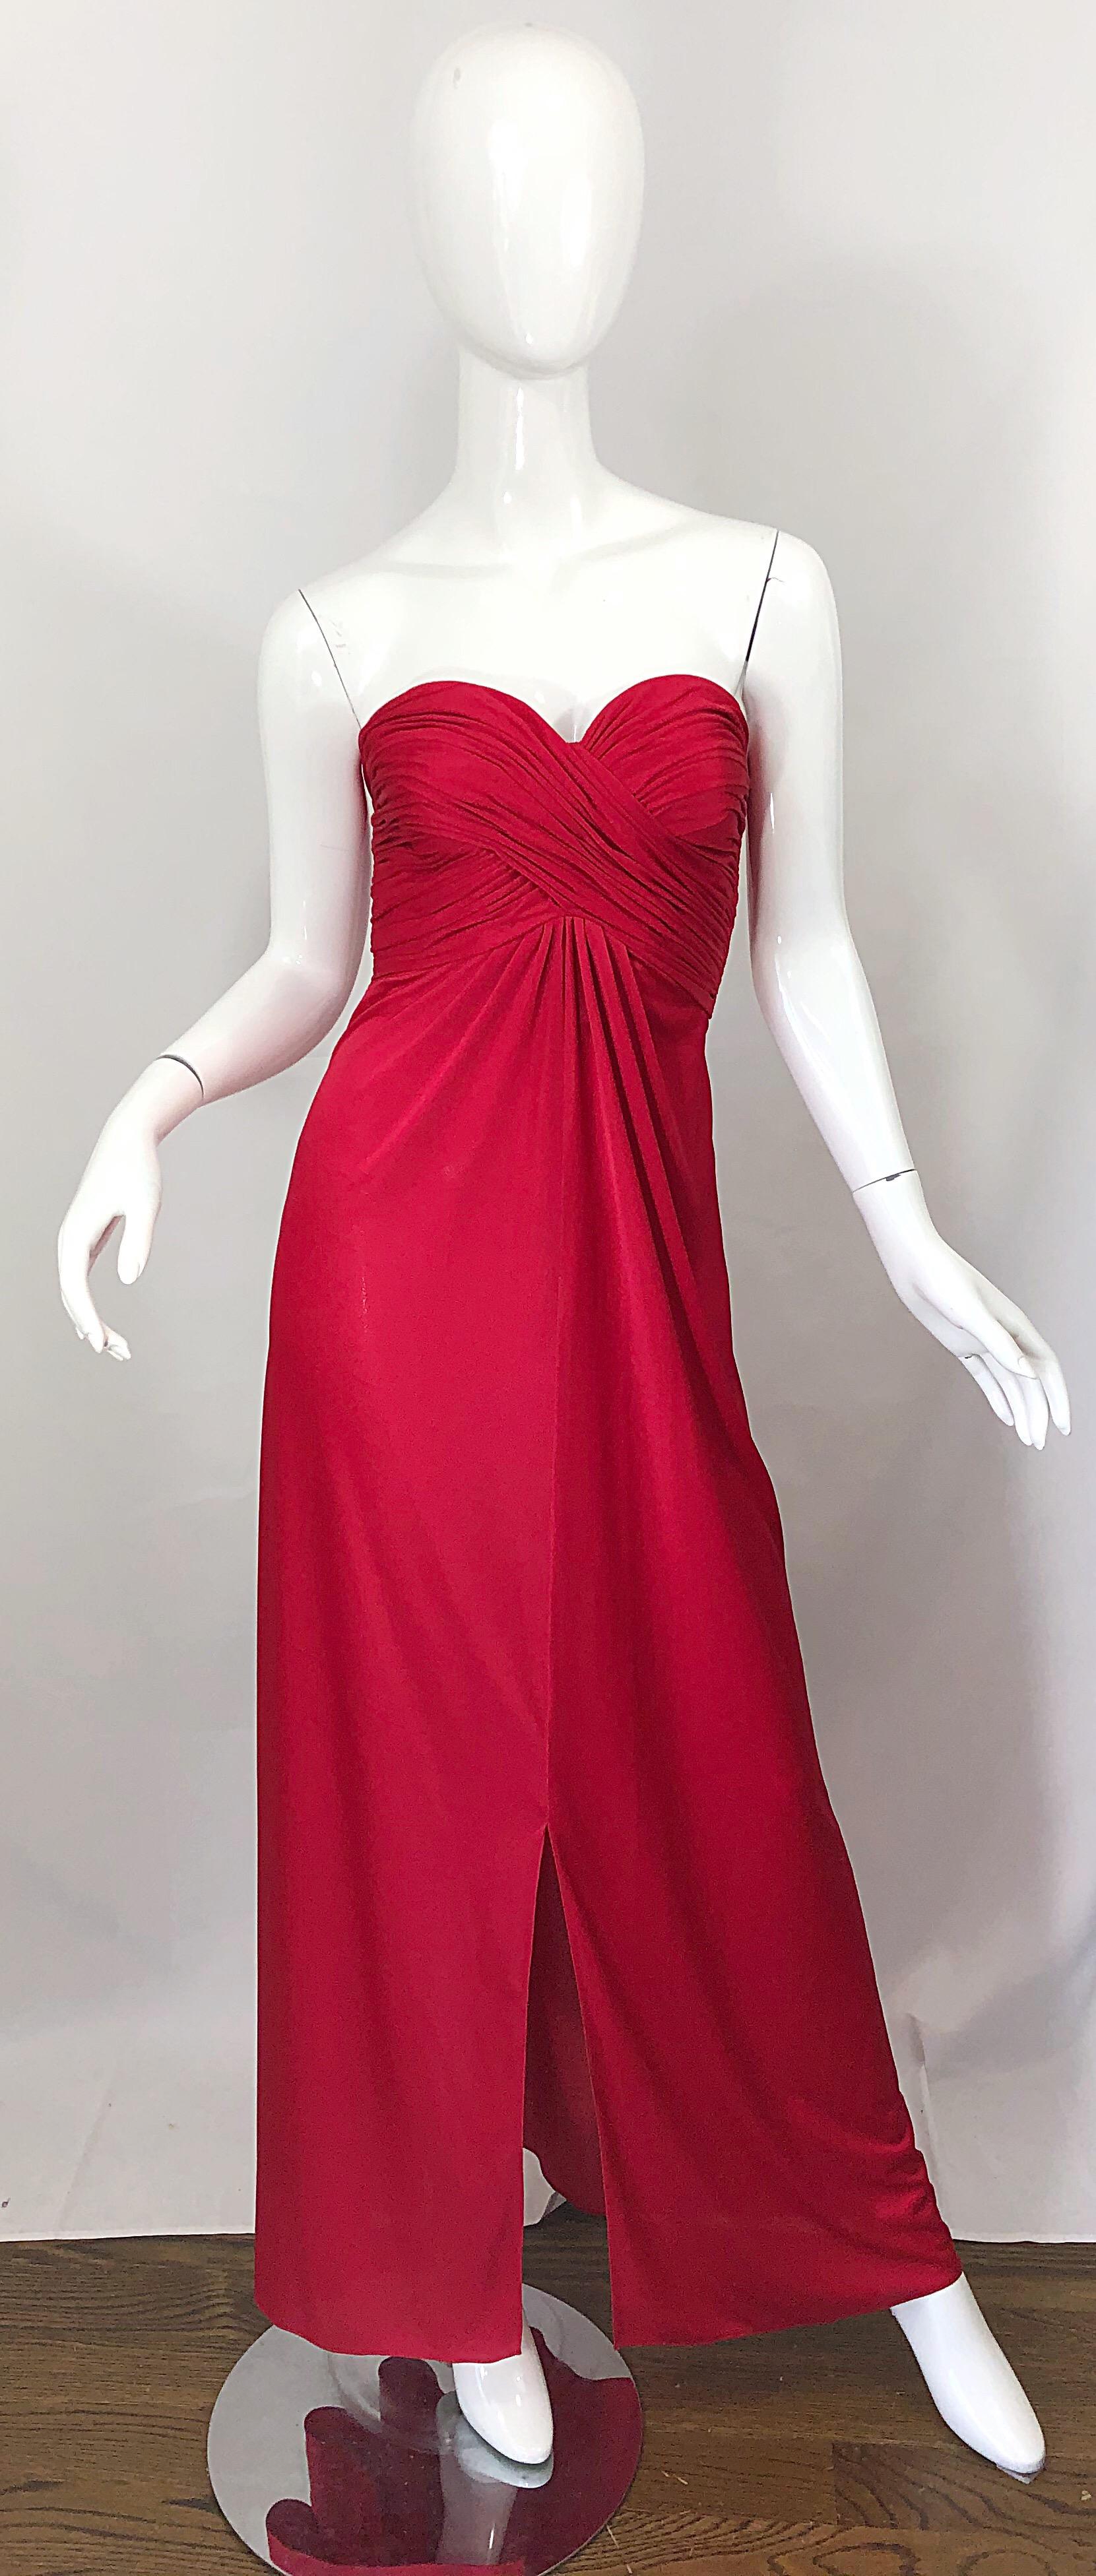 Beautiful mid 1970s LUIS ESTEVEZ lipstick red silk jersey strapless Grecian gown / maxi dress ! Features an intricate gathered boned bodice. Full metal zipper up the side with hook-and-eye closure. Slit up the center hem. Couture quality, with so